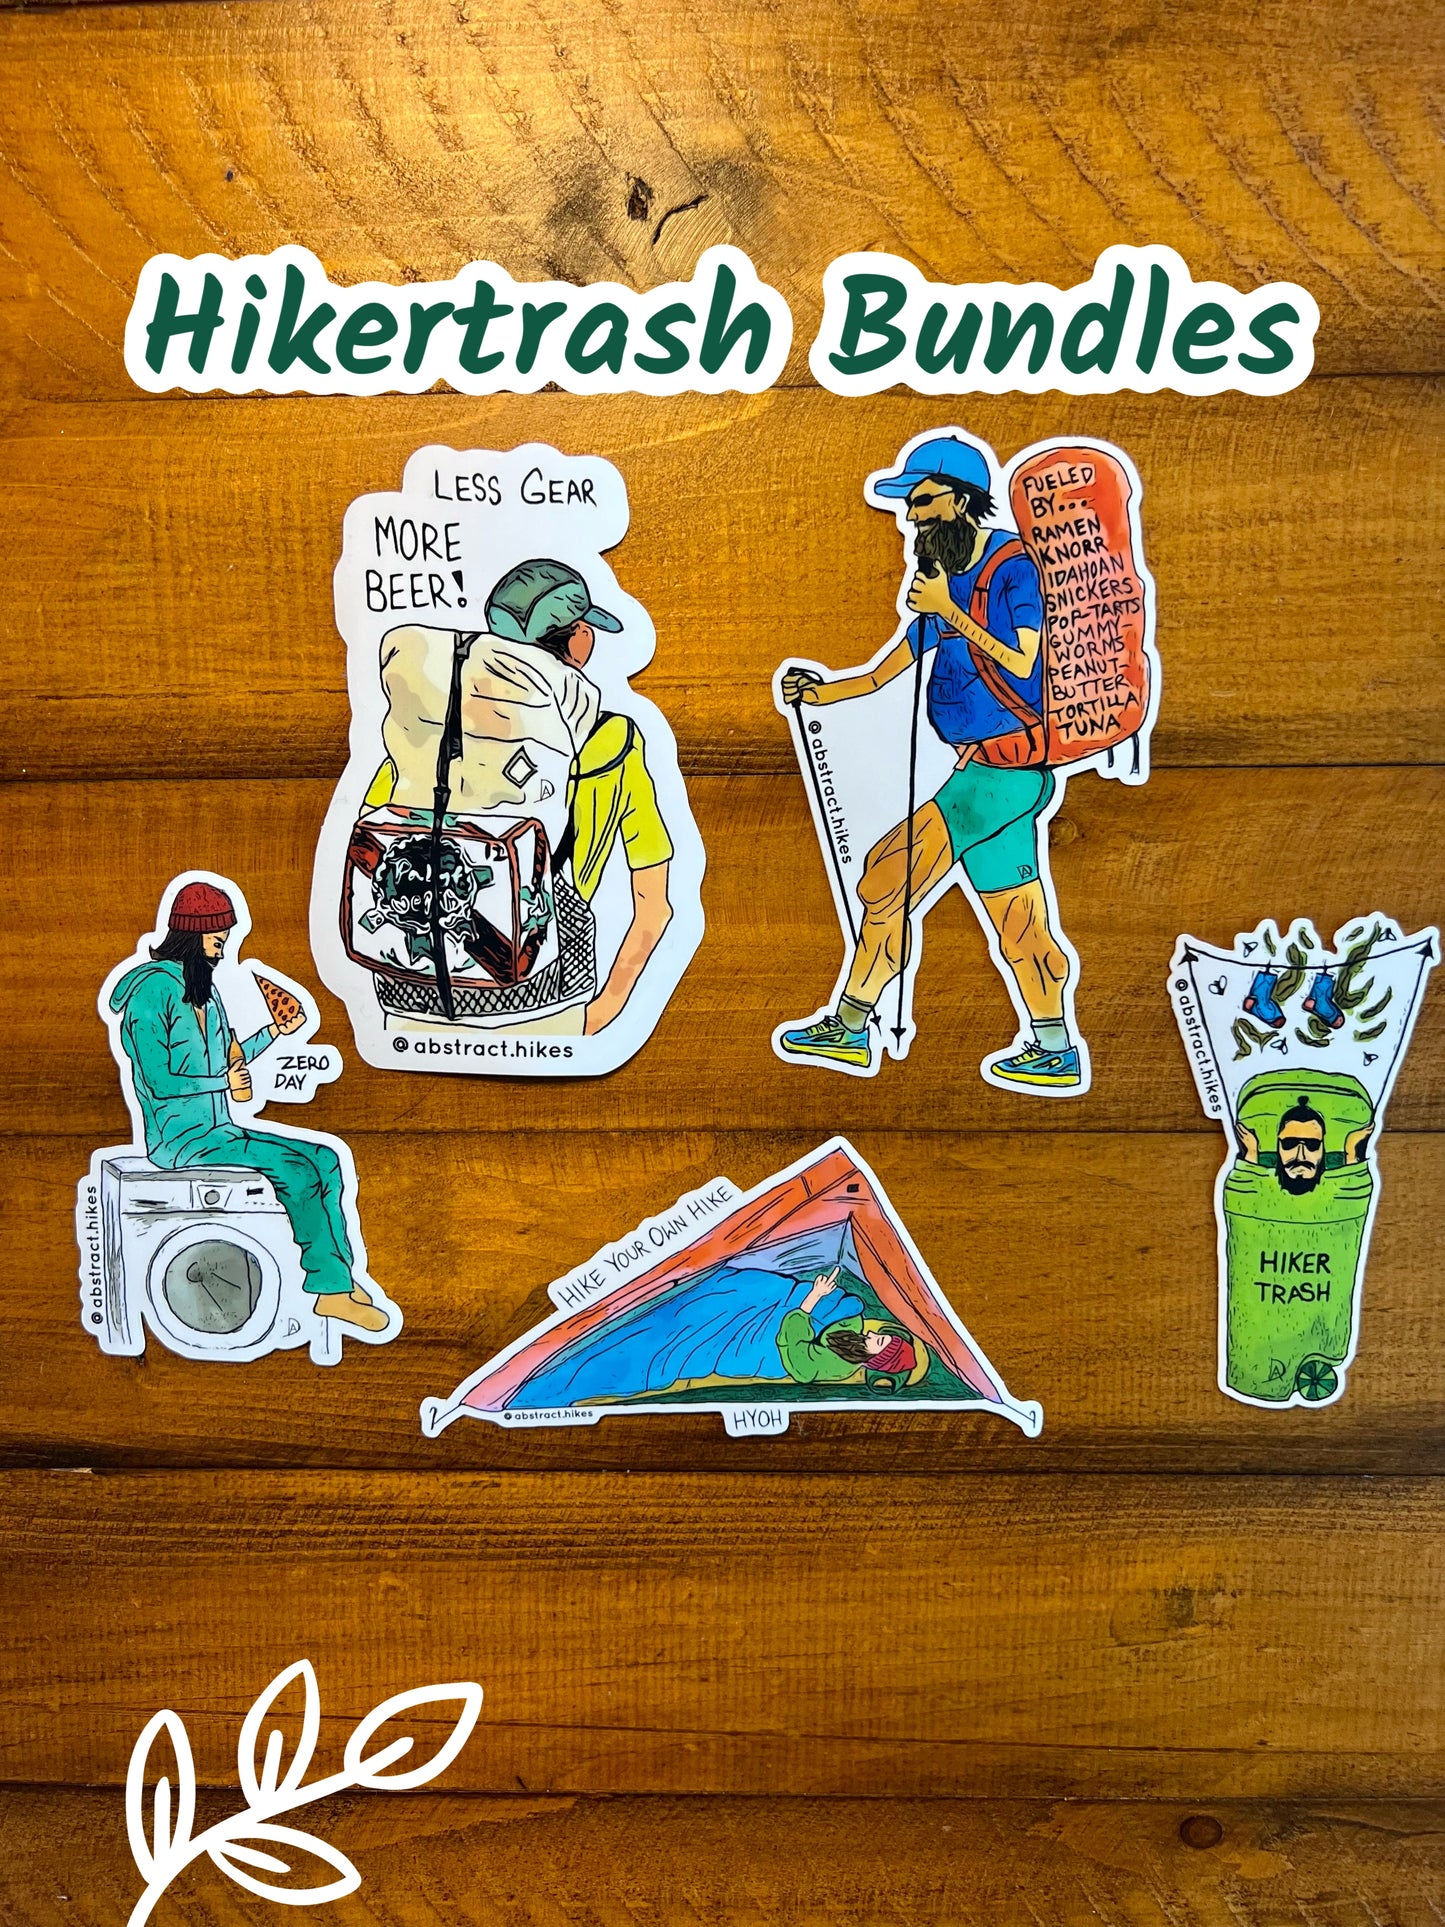 Hiking Sticker: "Hike Your Own Hike"